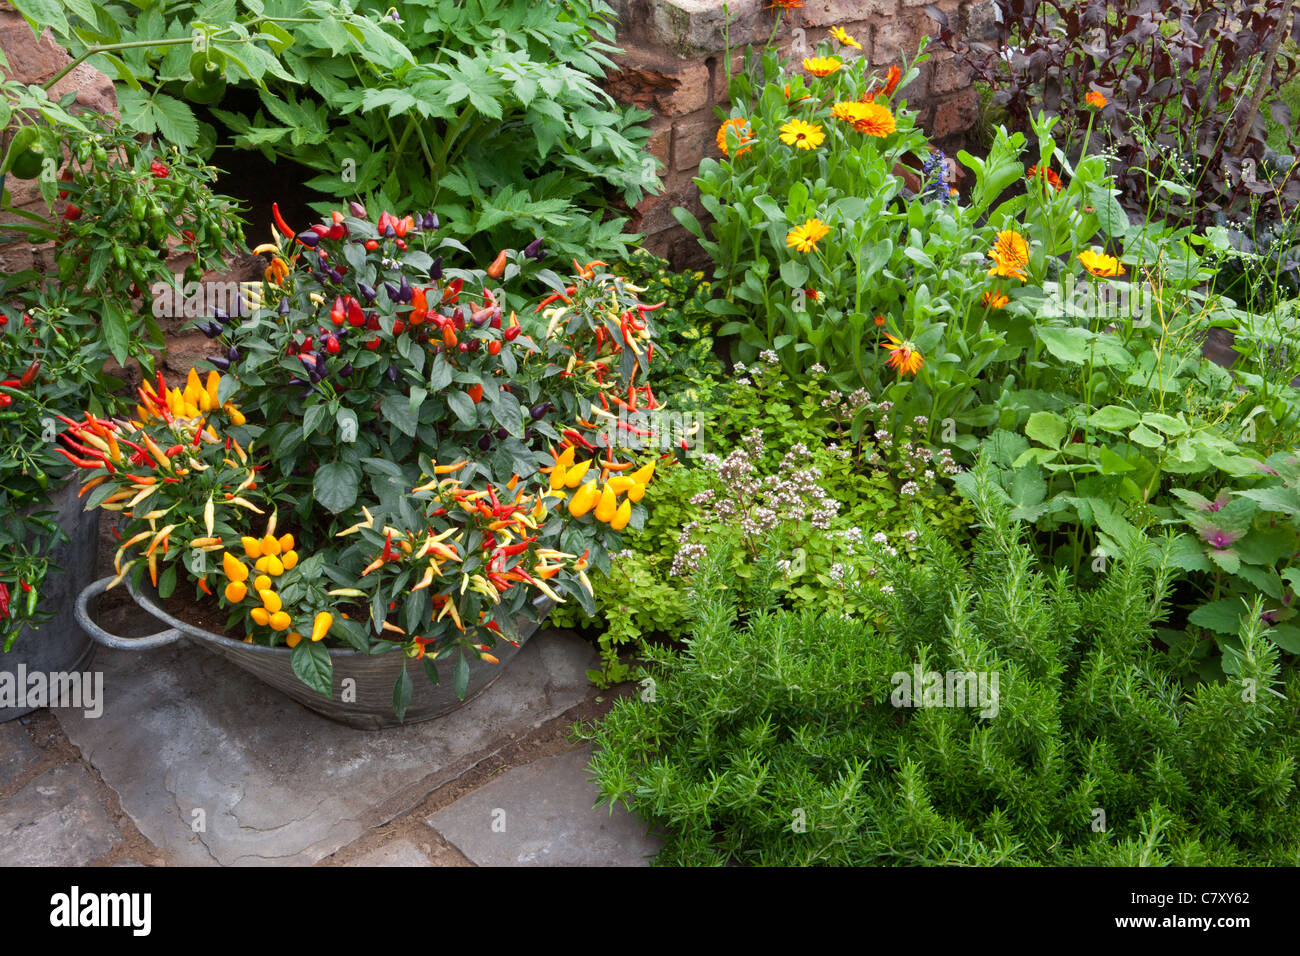 Small space garden with chillies chilli chili pepper plant plants growing in a galvanised metal container plant pot outdoors UK Stock Photo